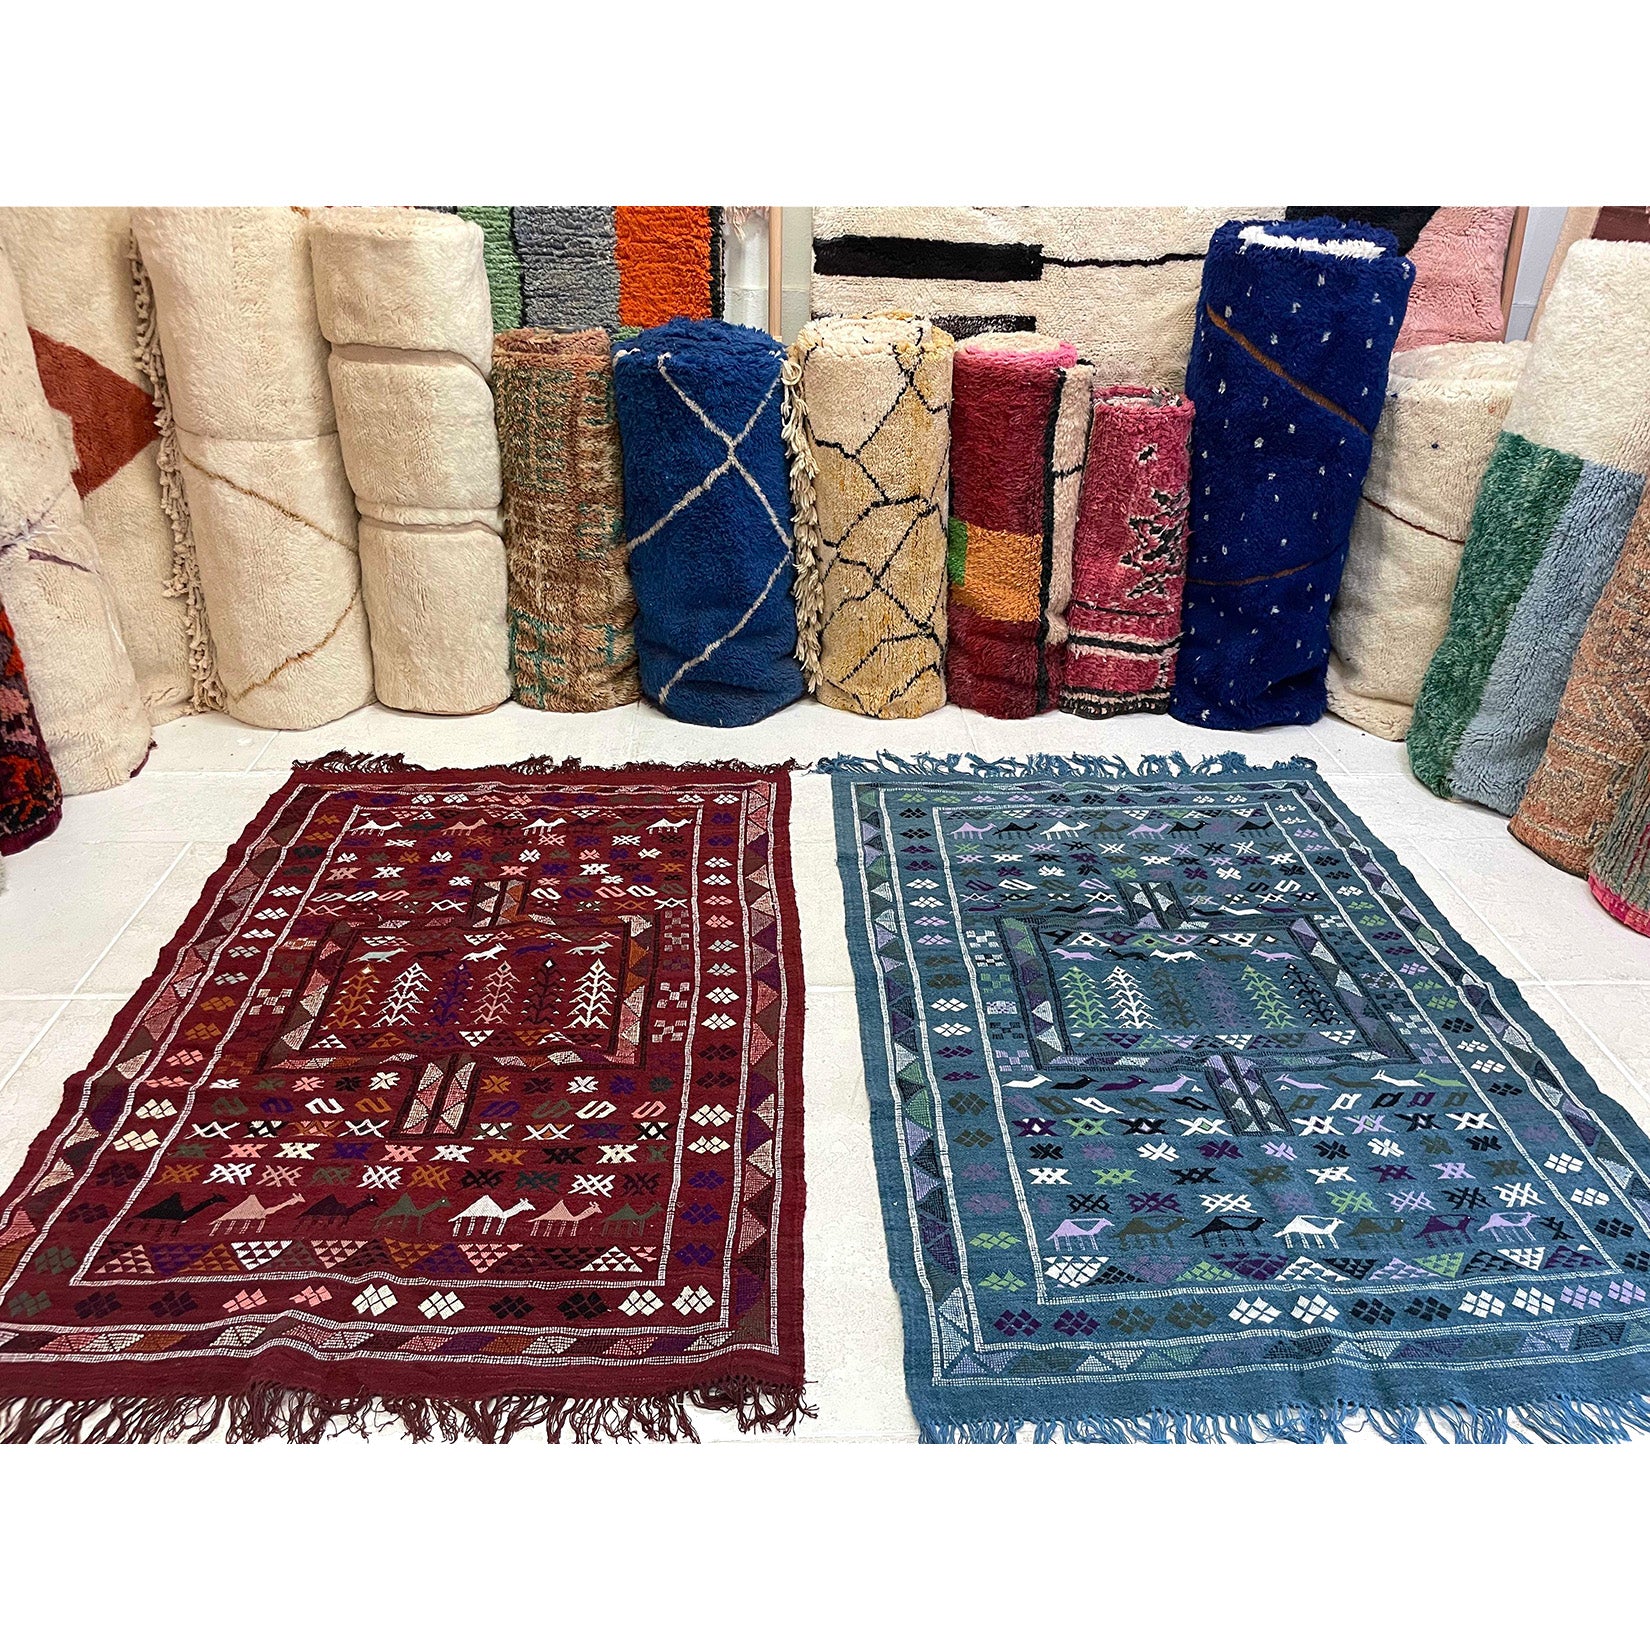 Moroccan kilims at The Rug Shop with bundles of colorful rugs in the background  | Kantara Moroccan Rugs in Los Angeles